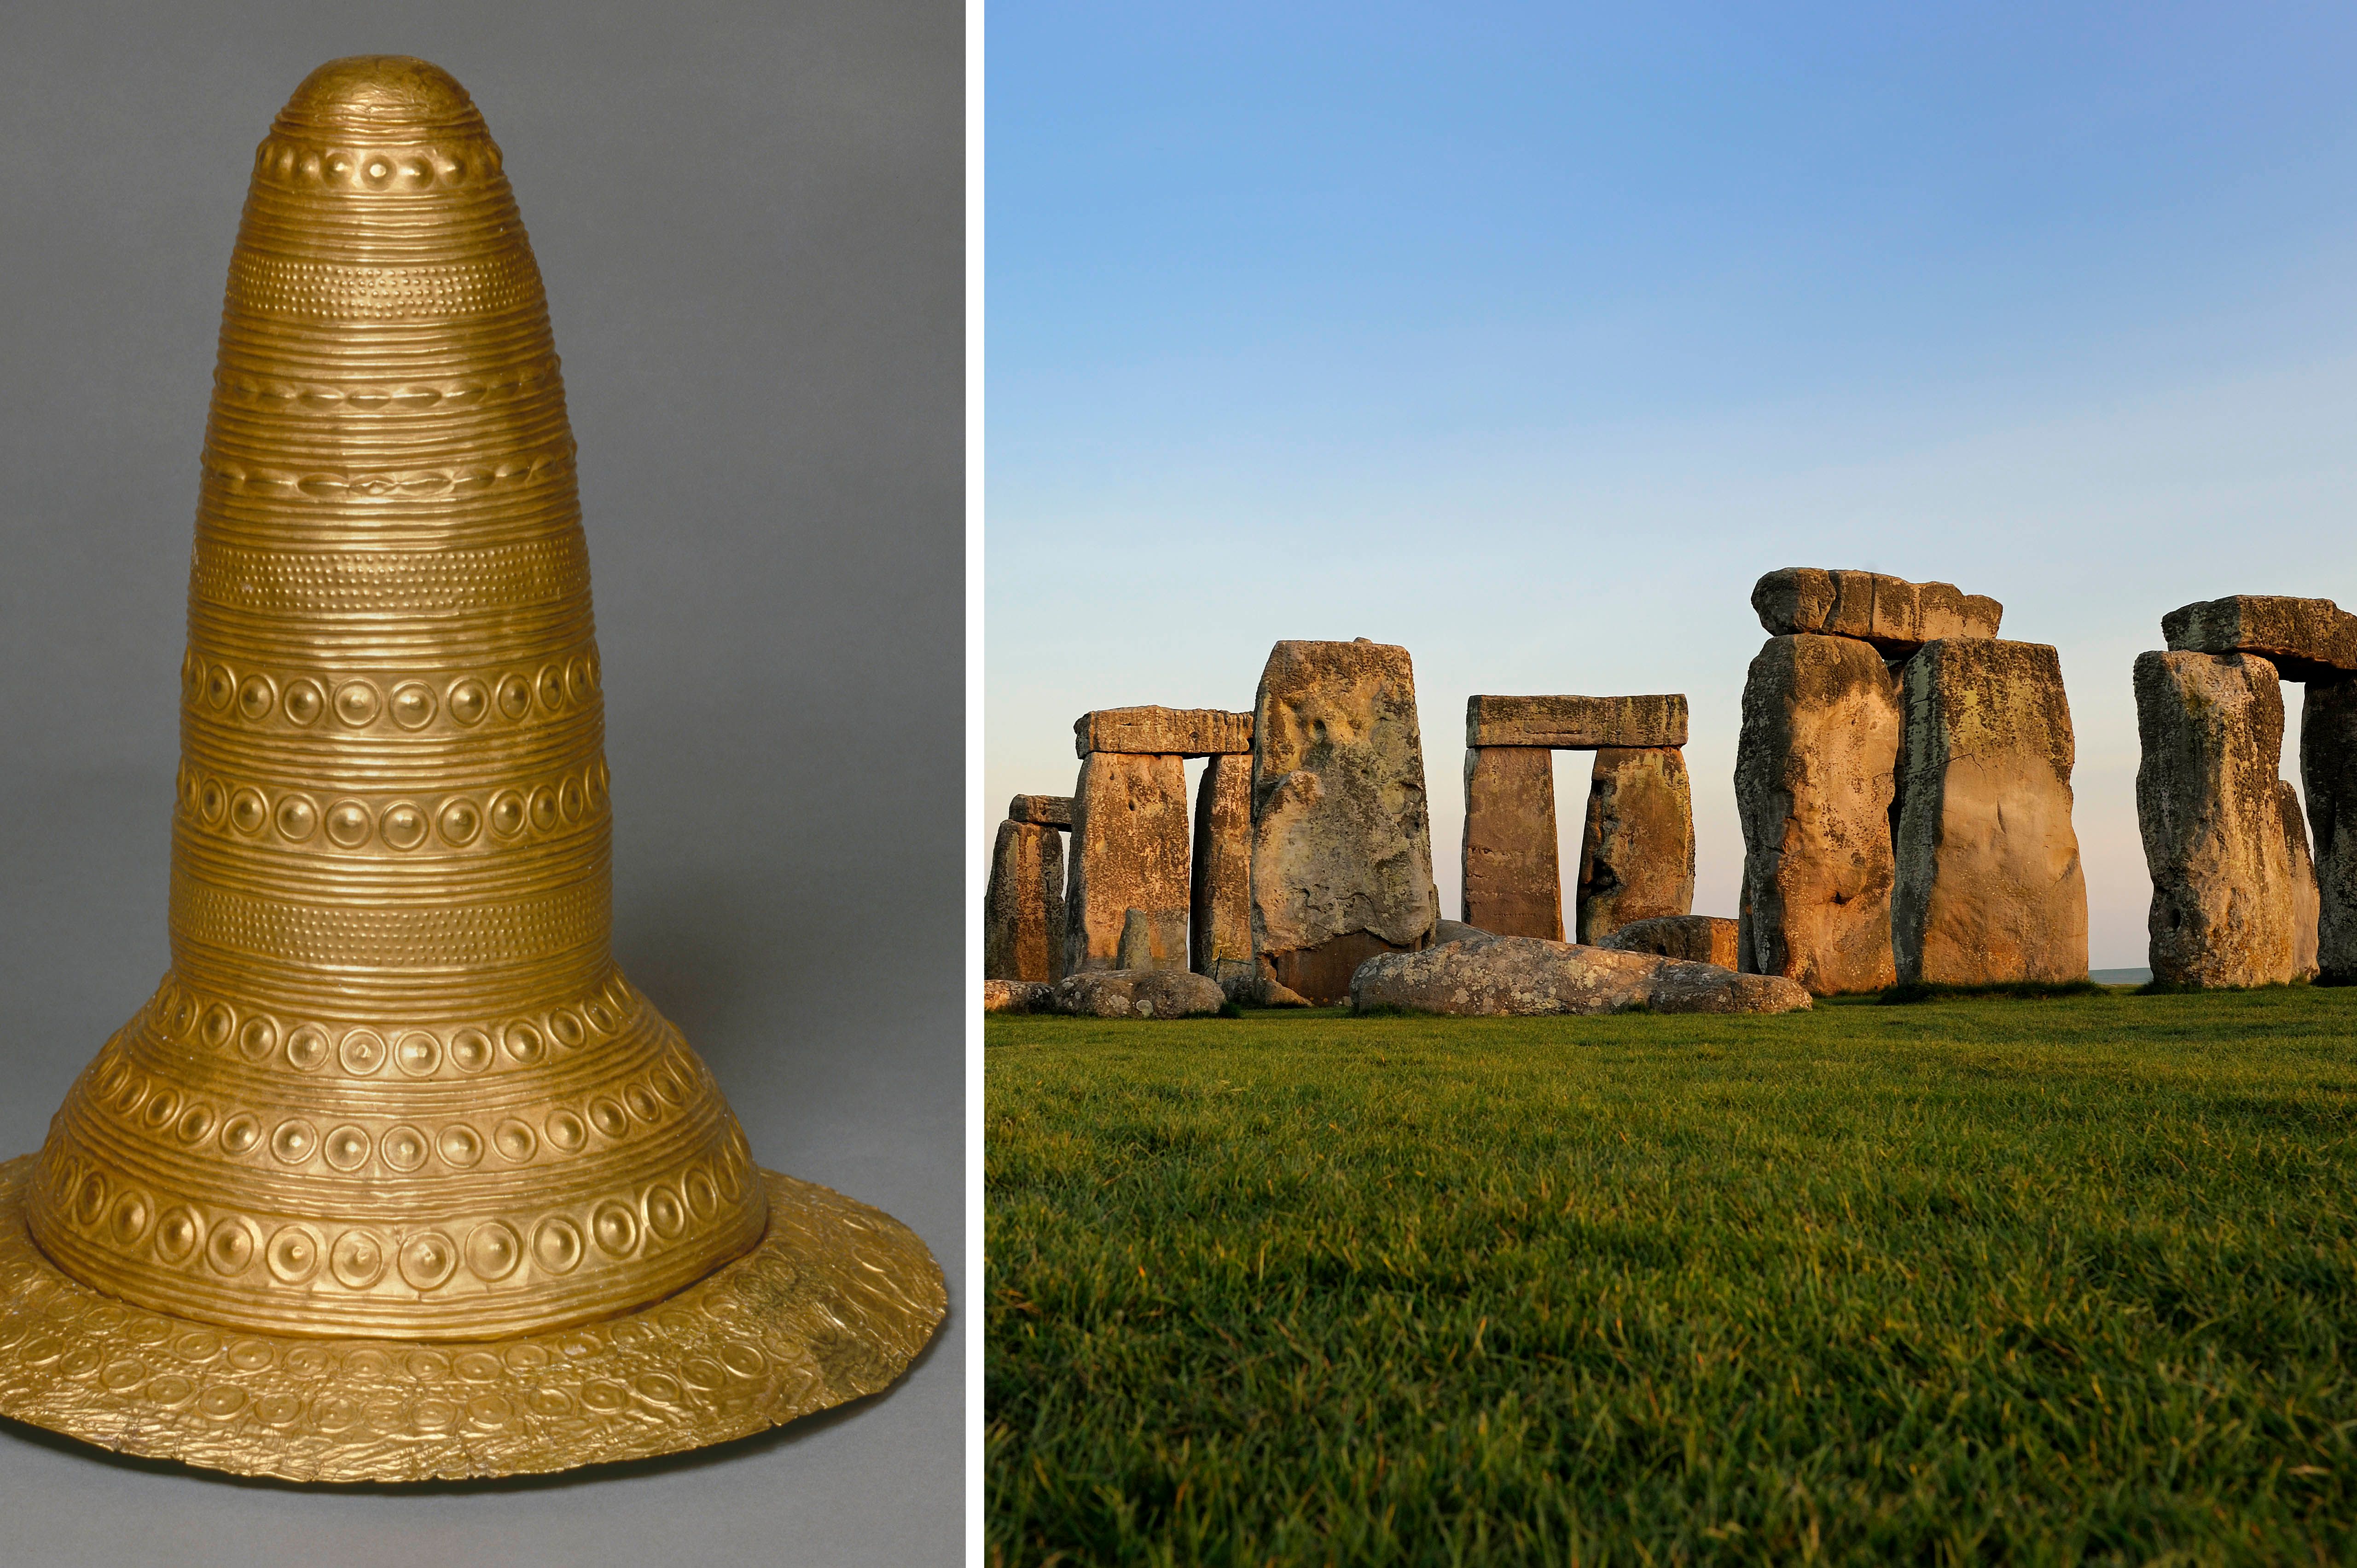 Golden hats, celestial discs and circles of wood and stone